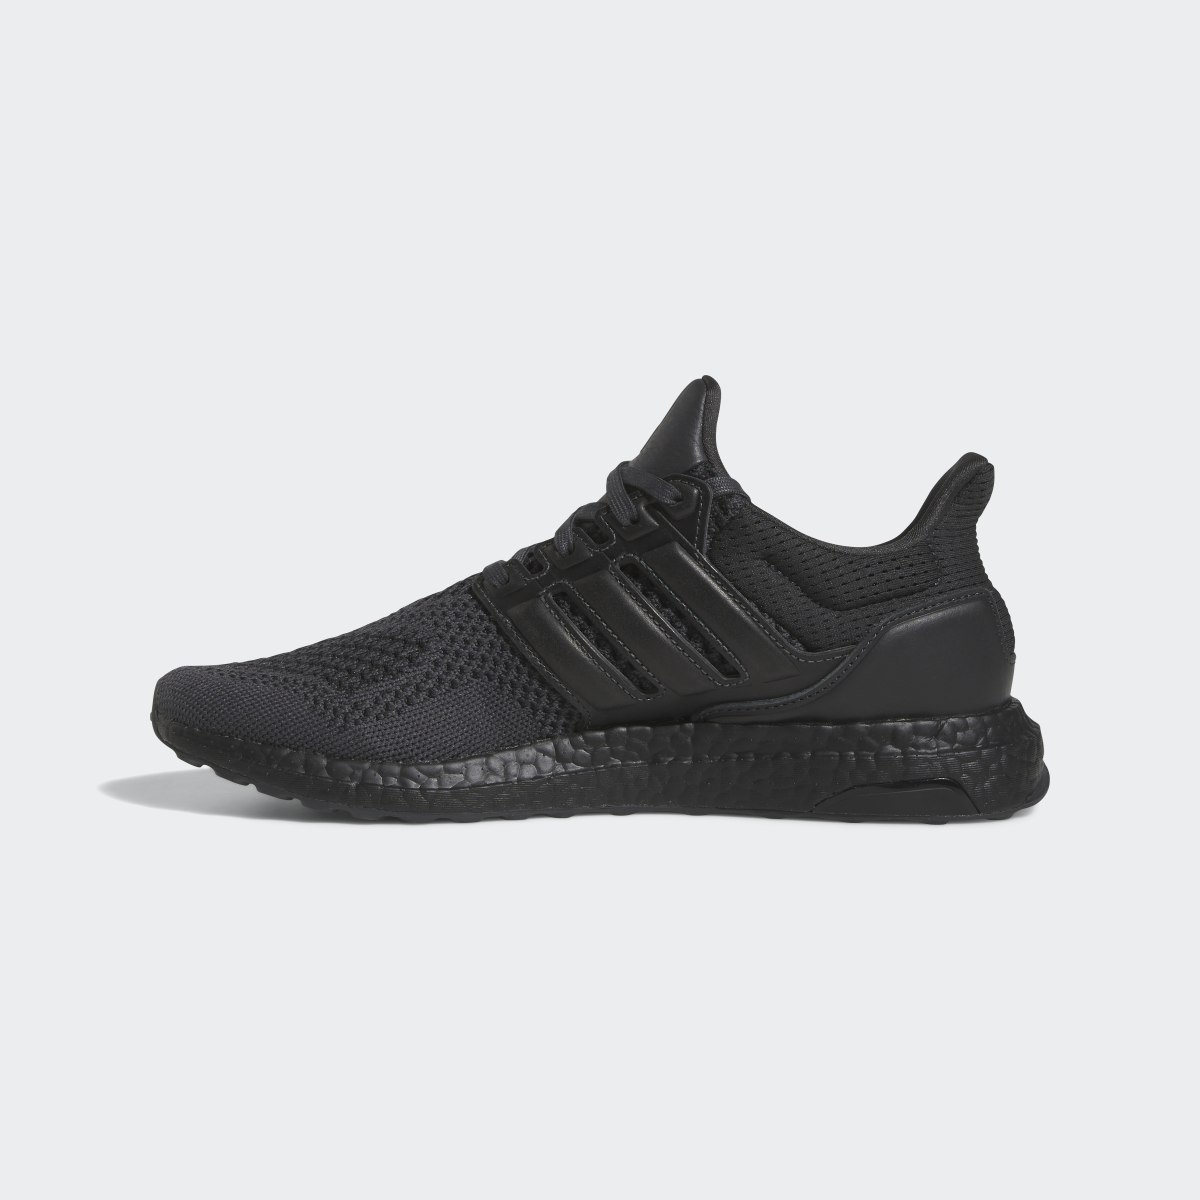 Adidas Ultraboost 1 DNA Shoes. 10